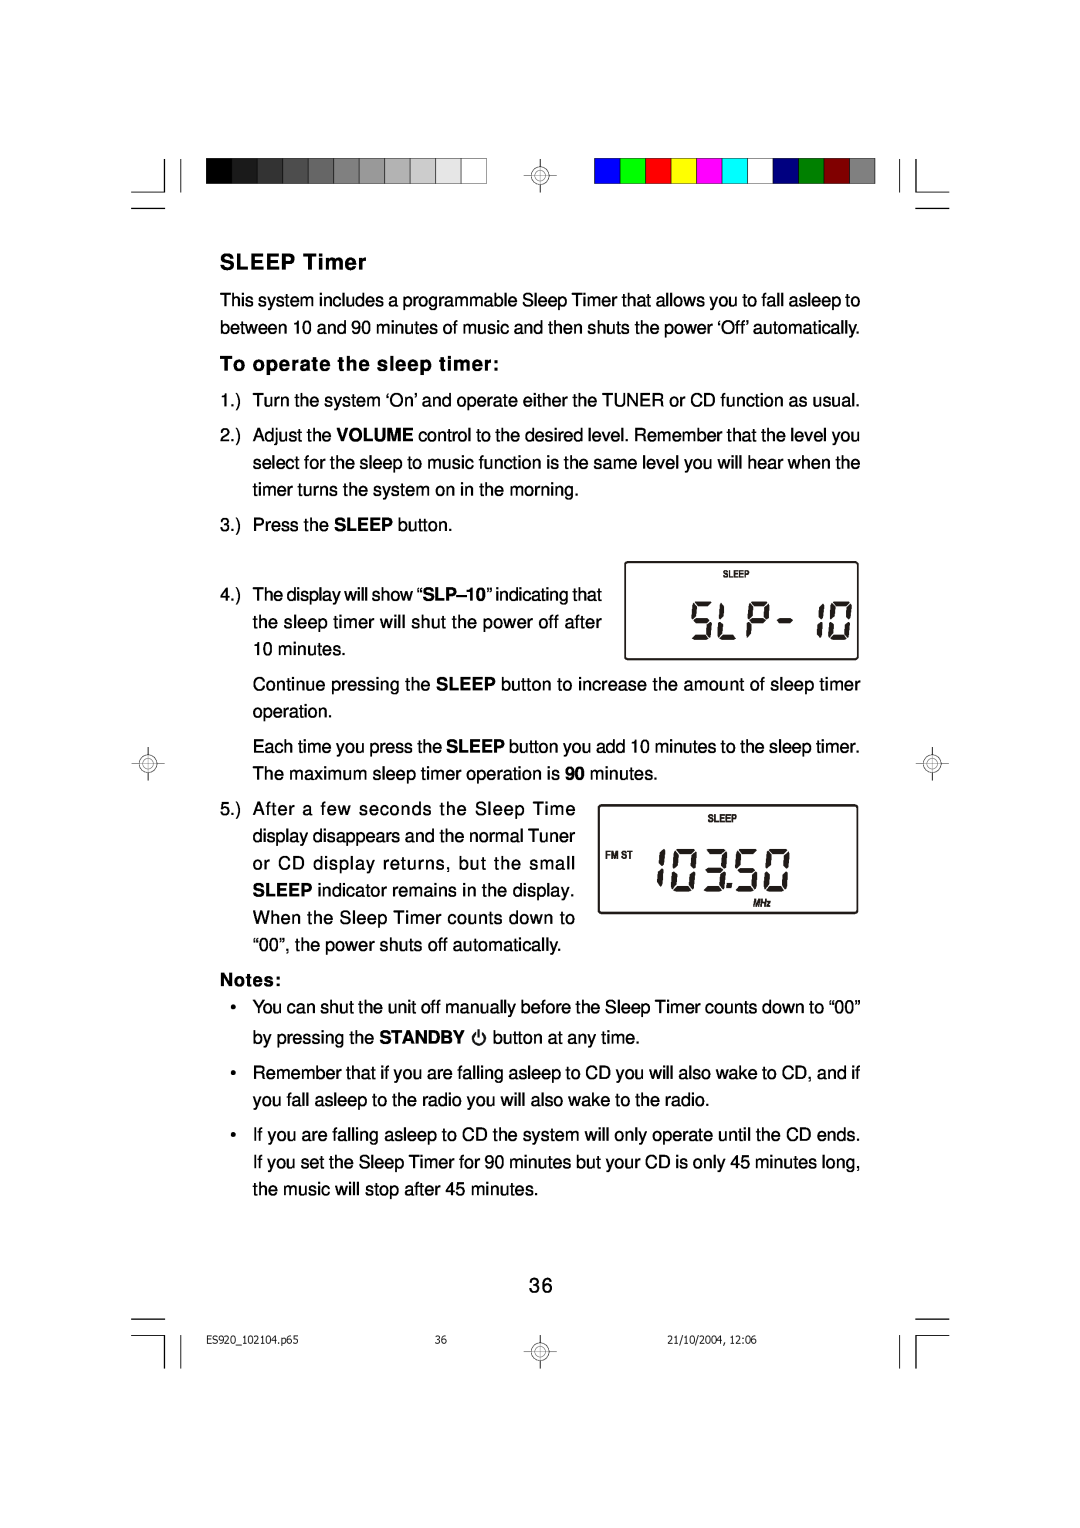 Emerson ES920 owner manual SLEEP Timer, To operate the sleep timer 